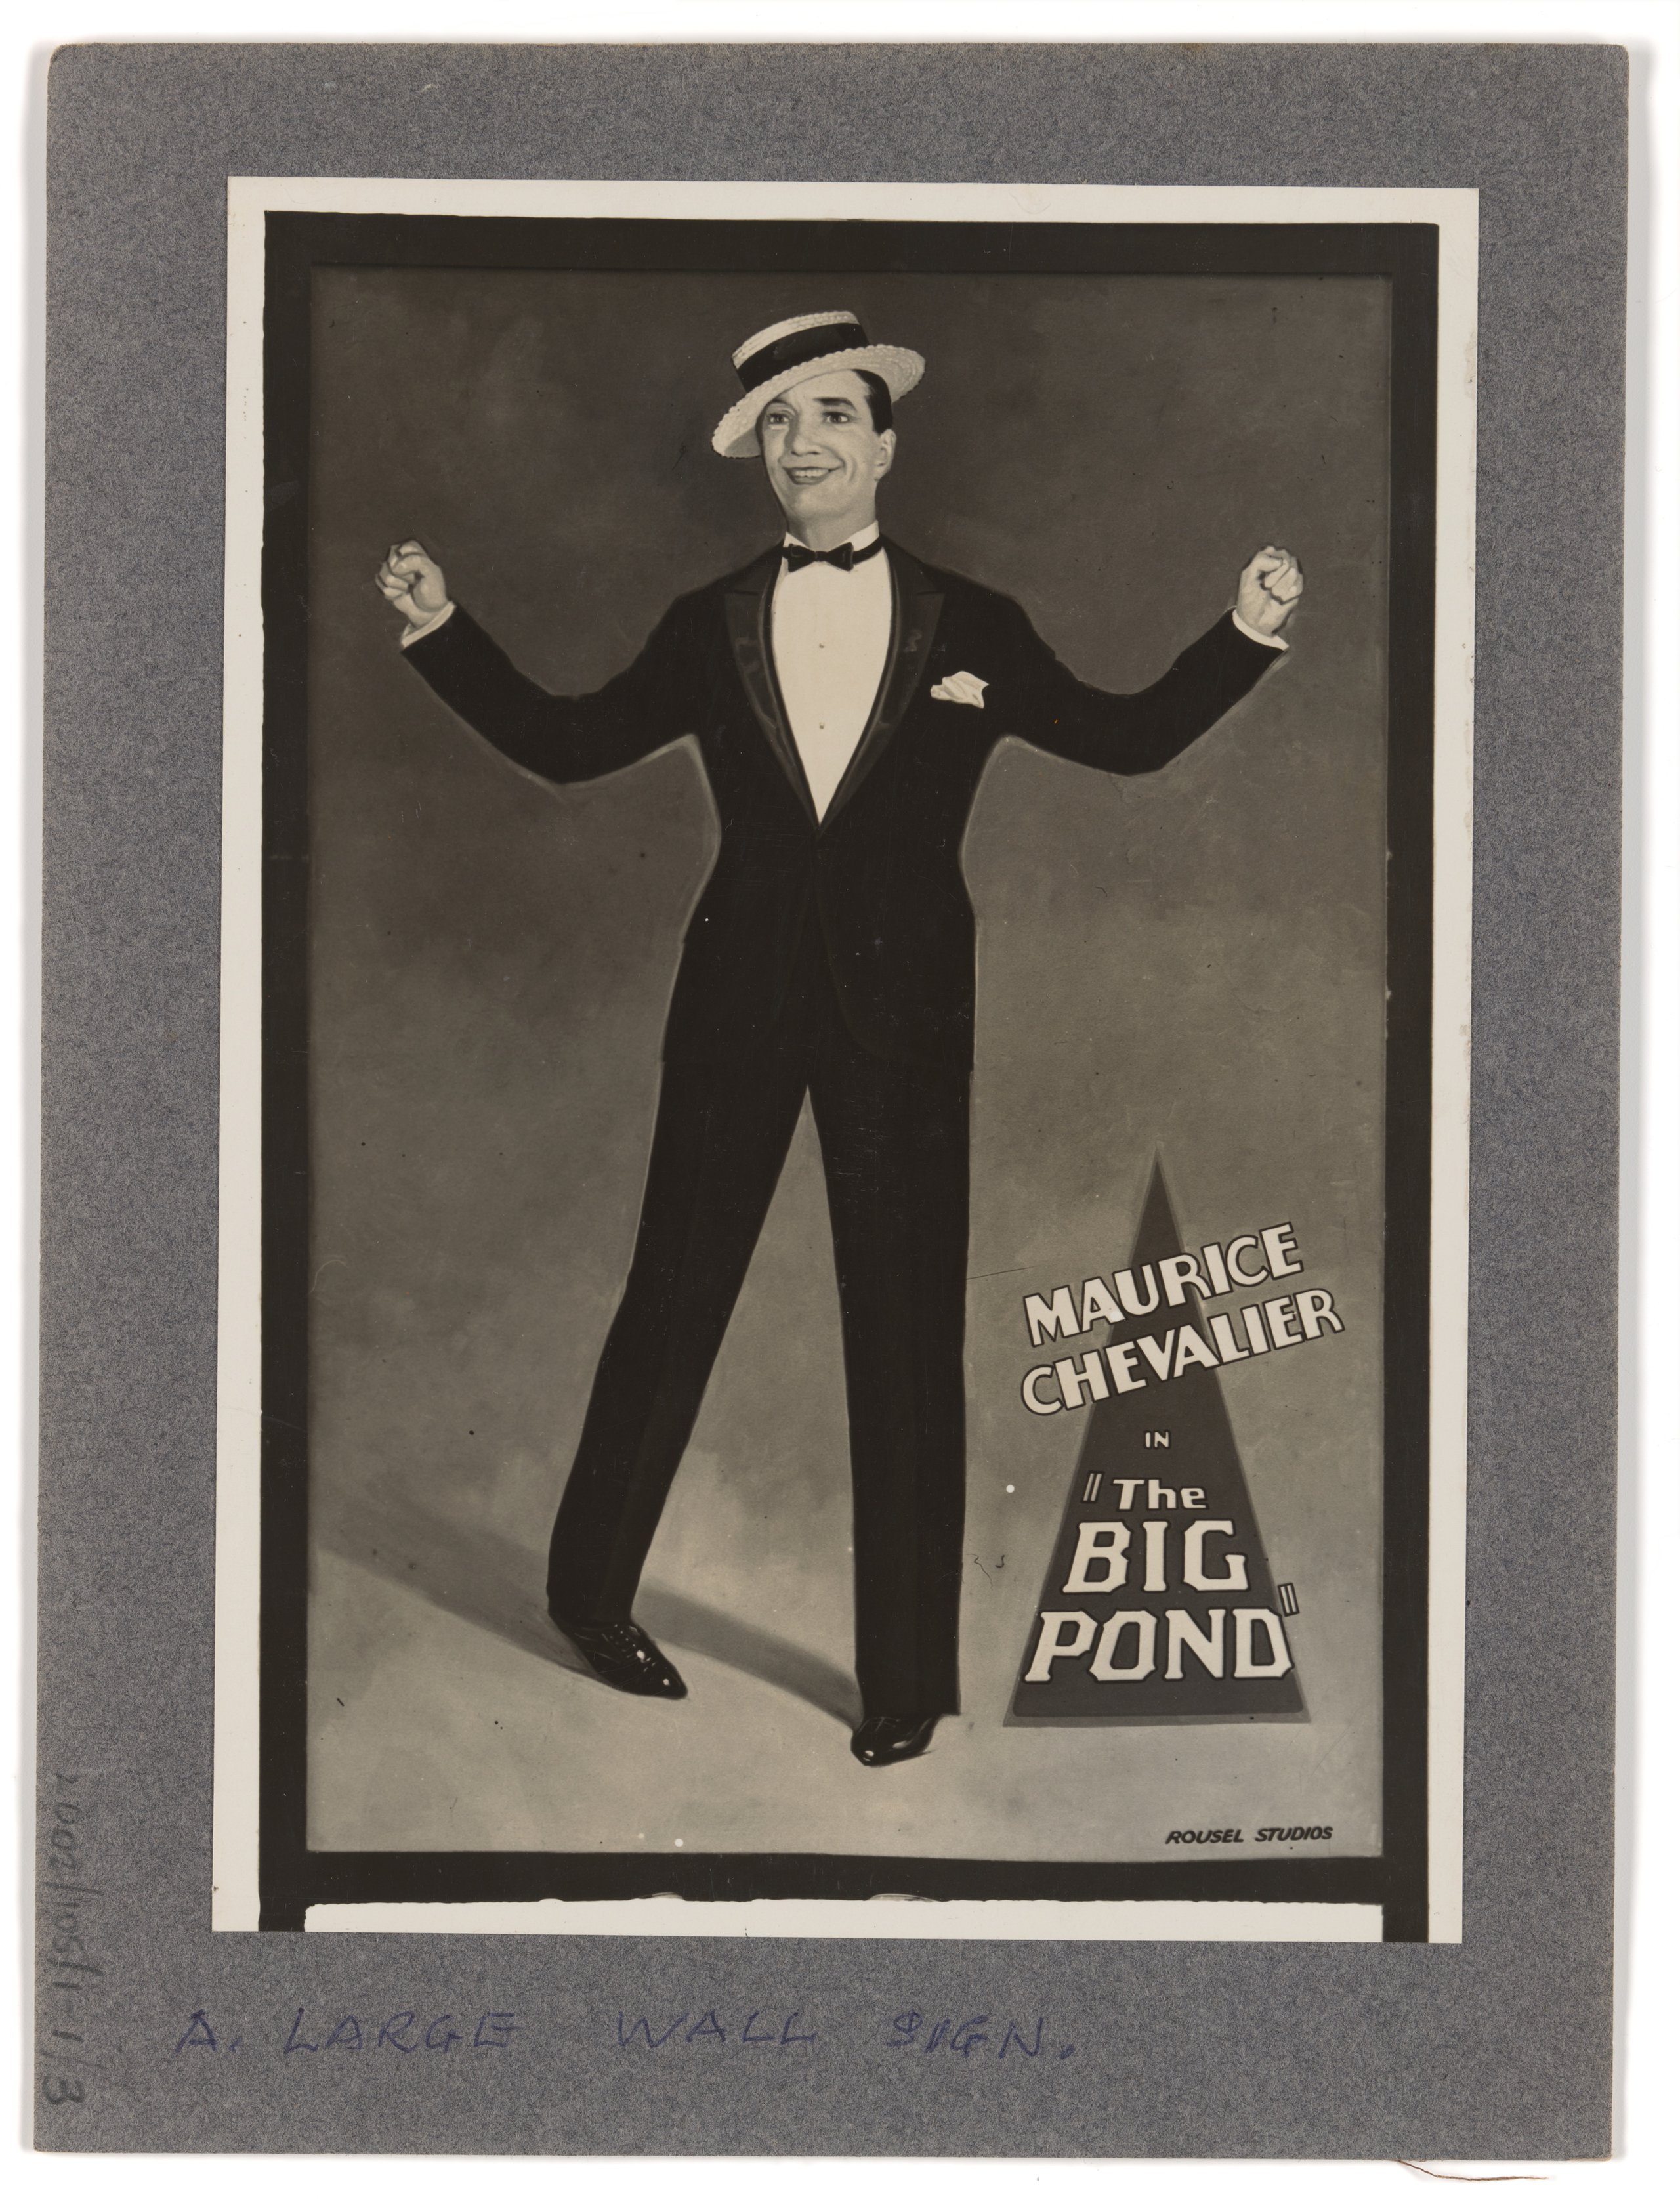 Photograph of large wall sign advertising the film "The Big Pond" starring Maurice Chevalier at the Prince Edward Theatre